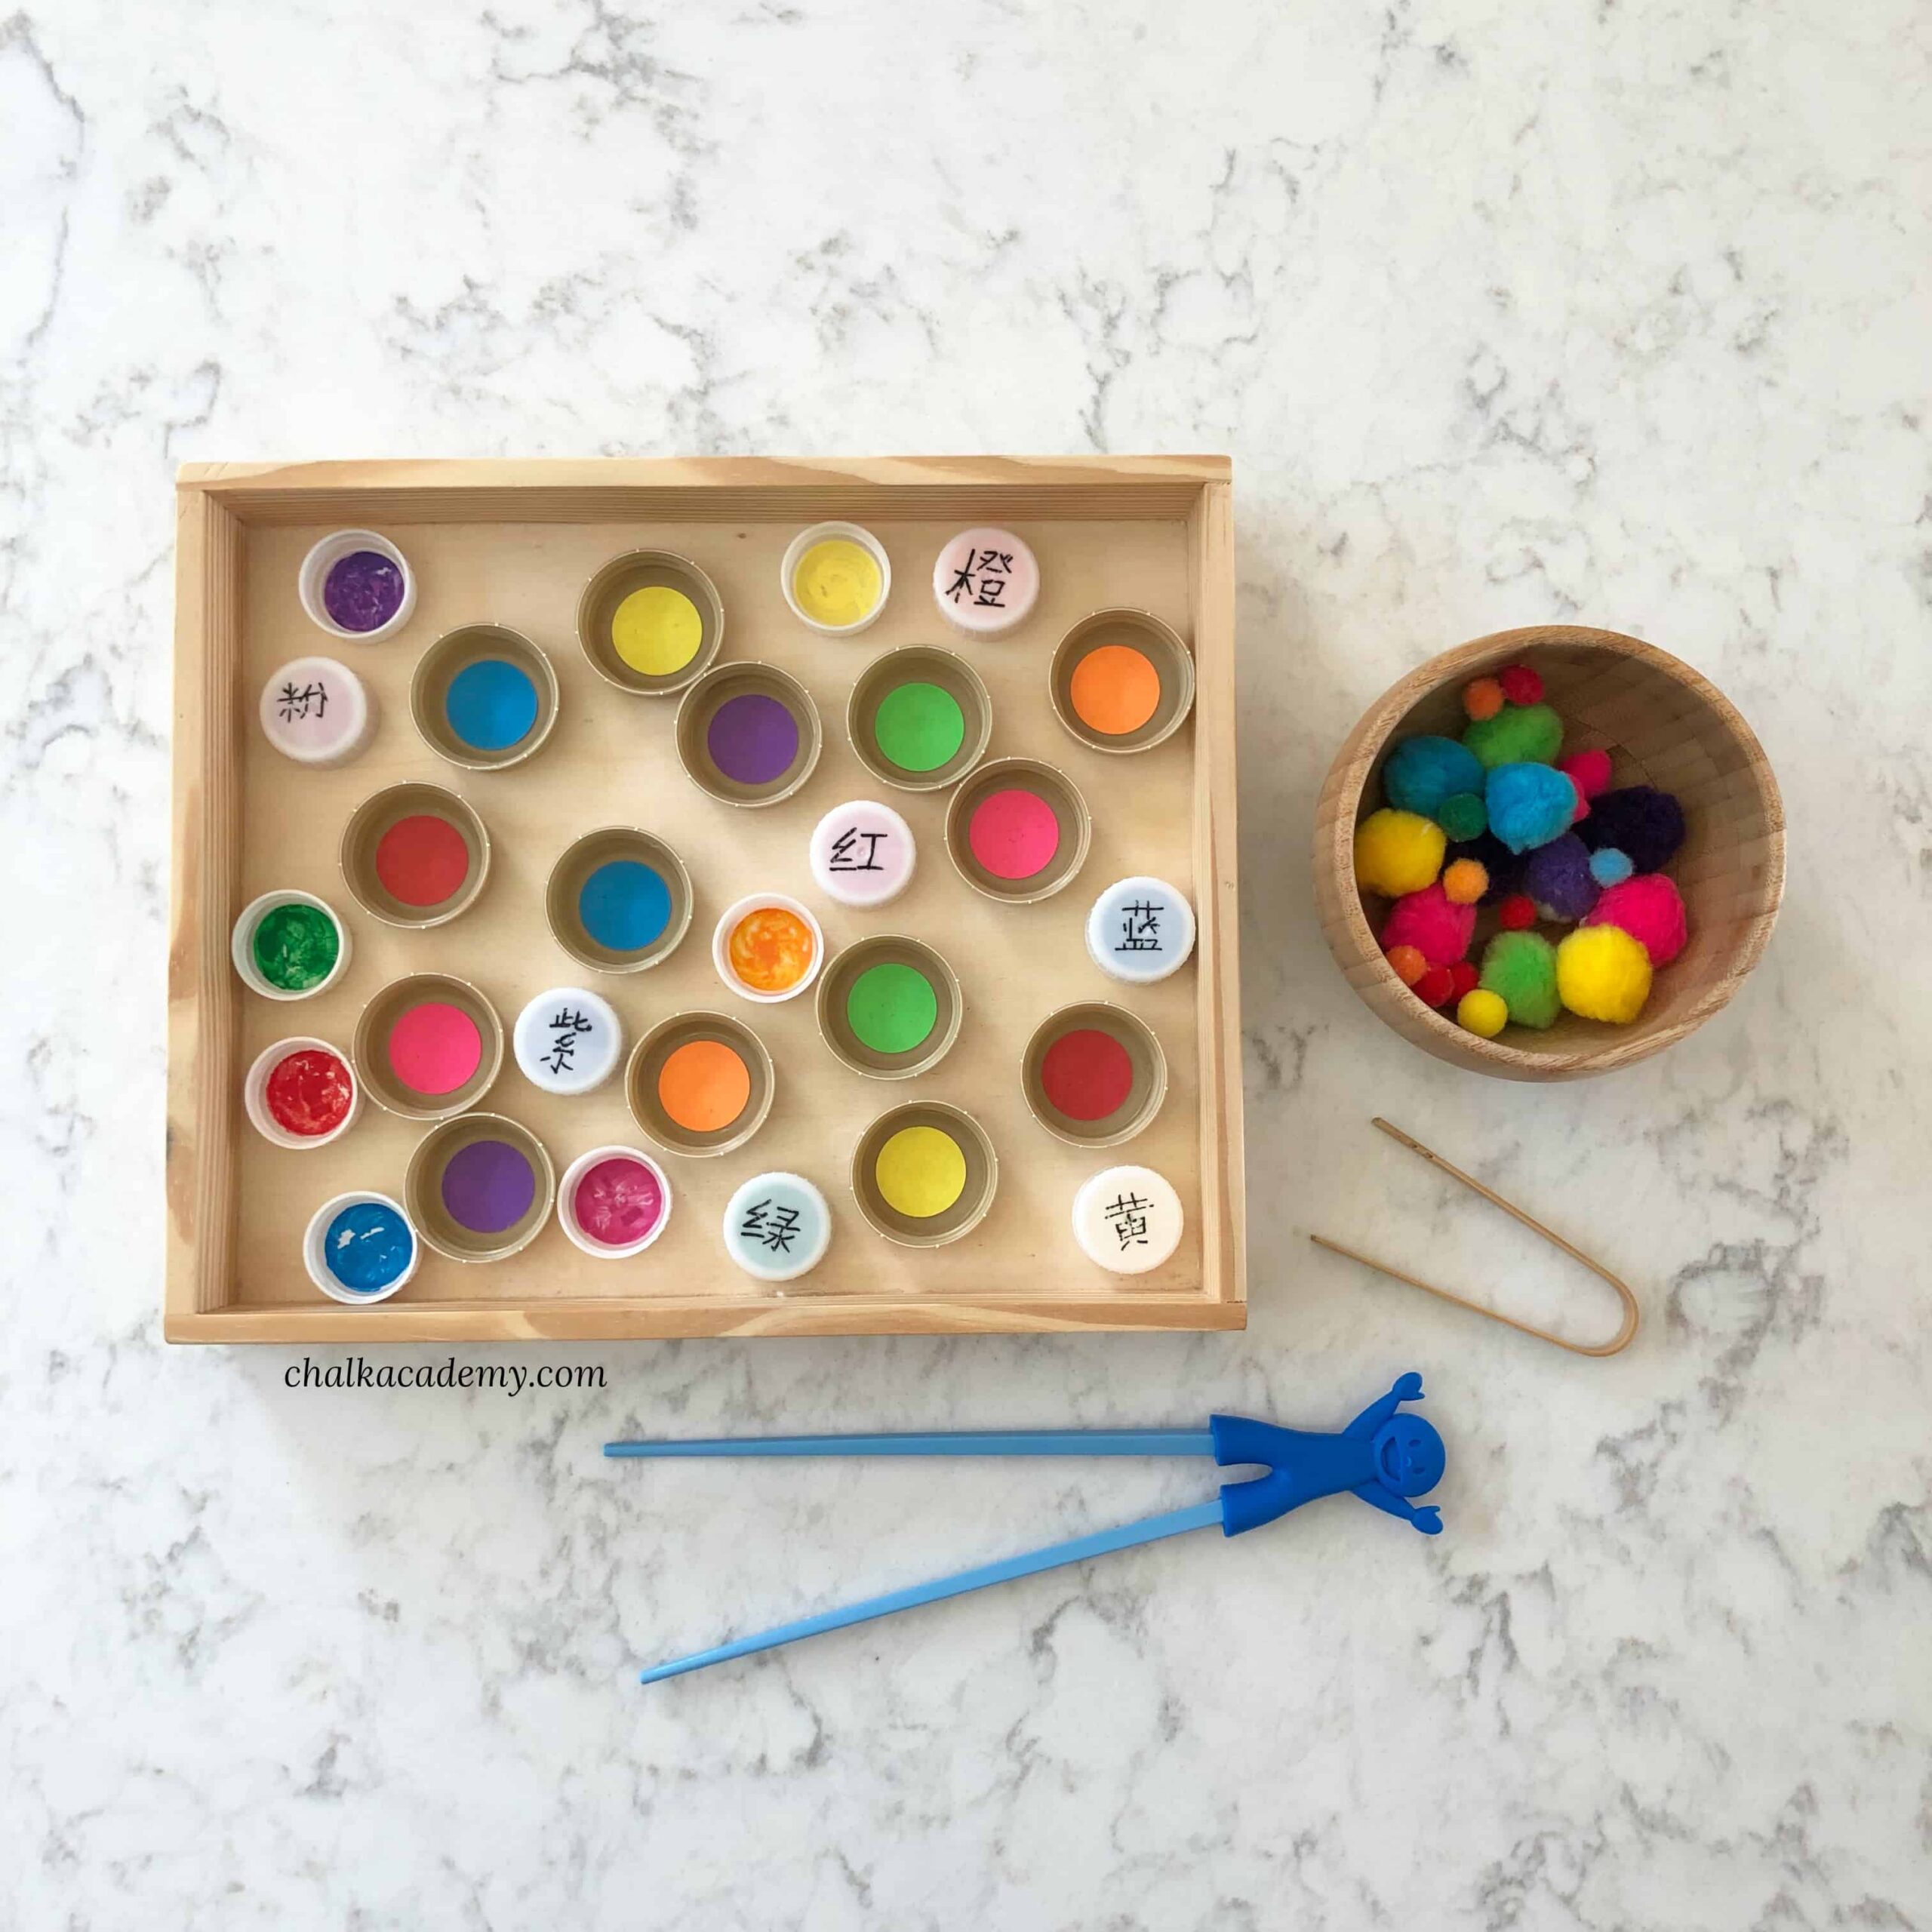 3 Easy Ways to Use Bottle Caps for Color Matching (VIDEO)